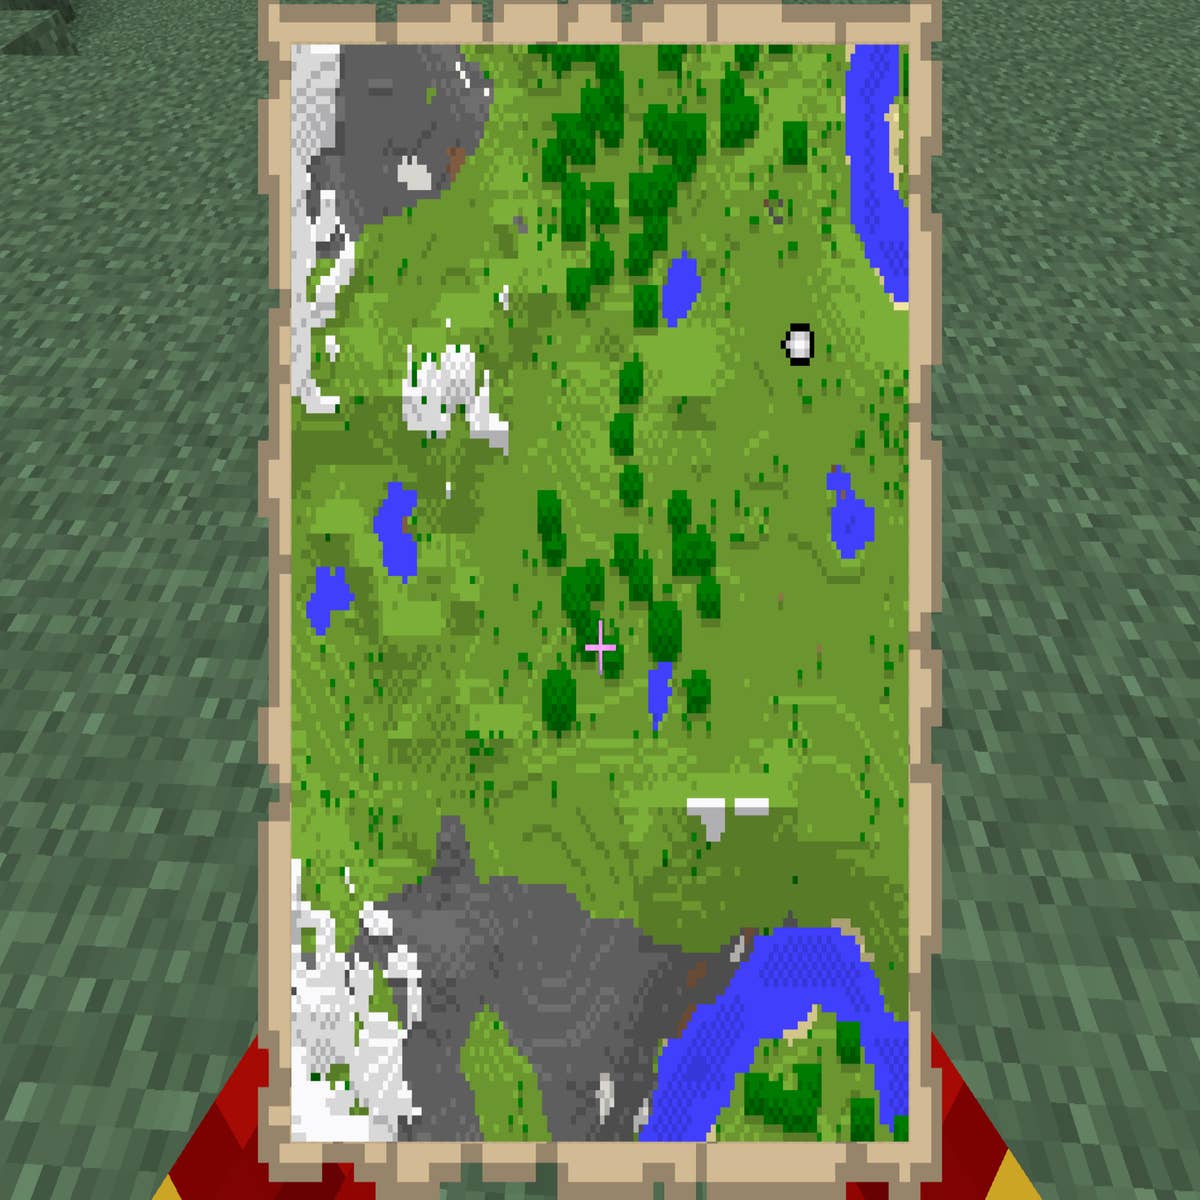 Minecraft maps – how to craft and use a map